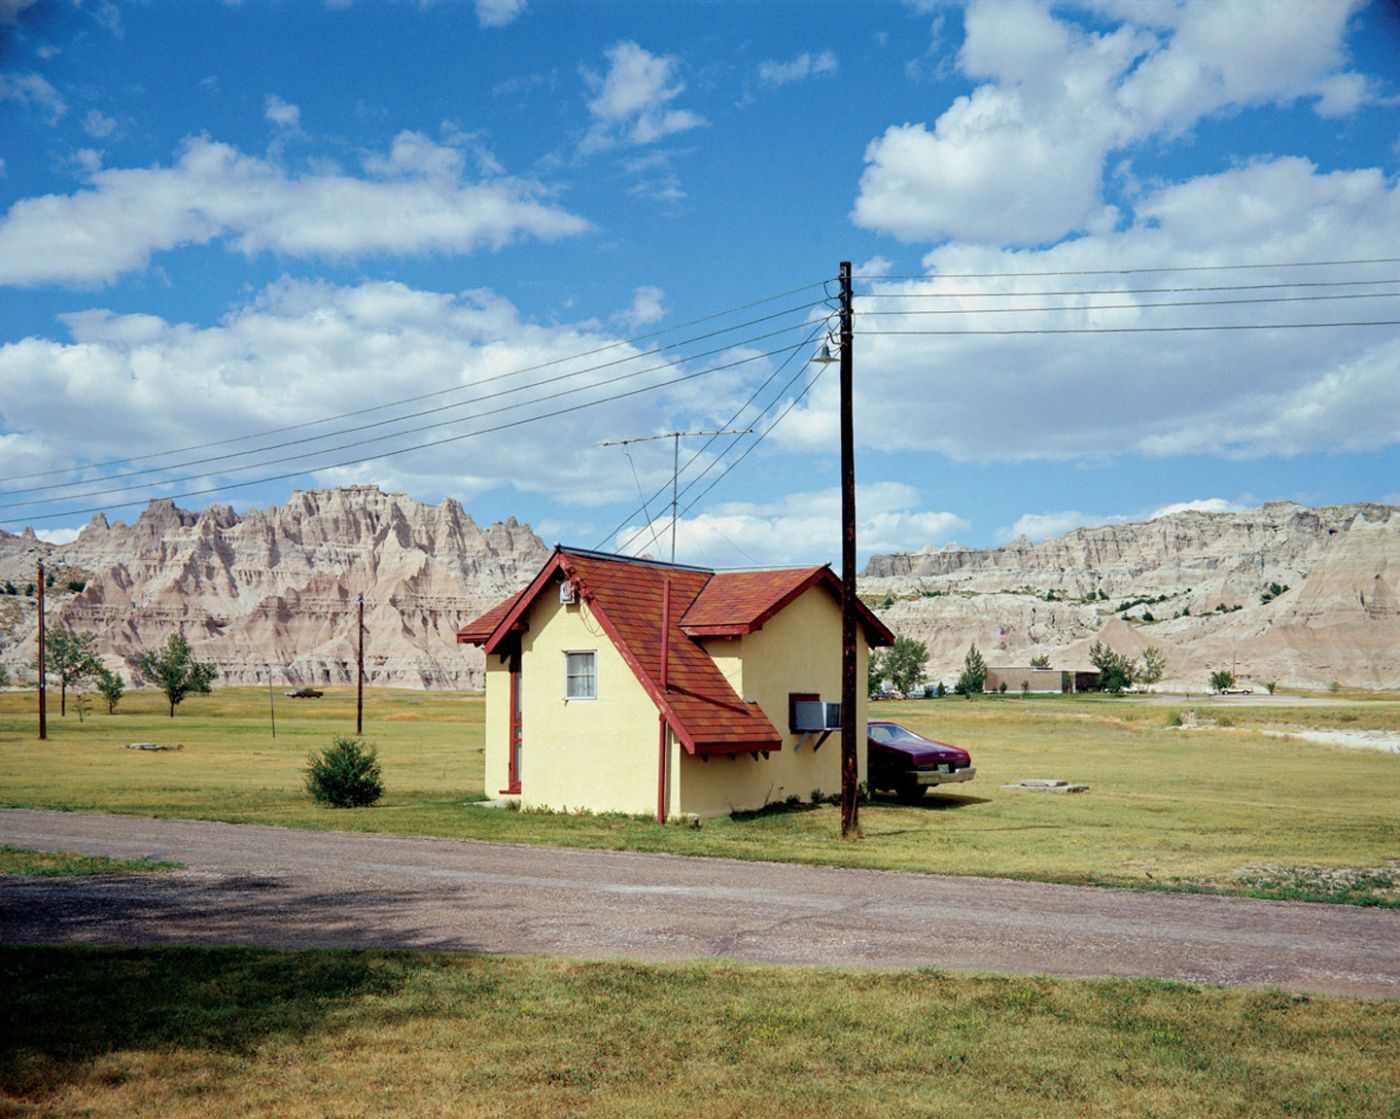 Stephen Shore: A Road Trip Journal, Limited Edition (with Type-C Print)